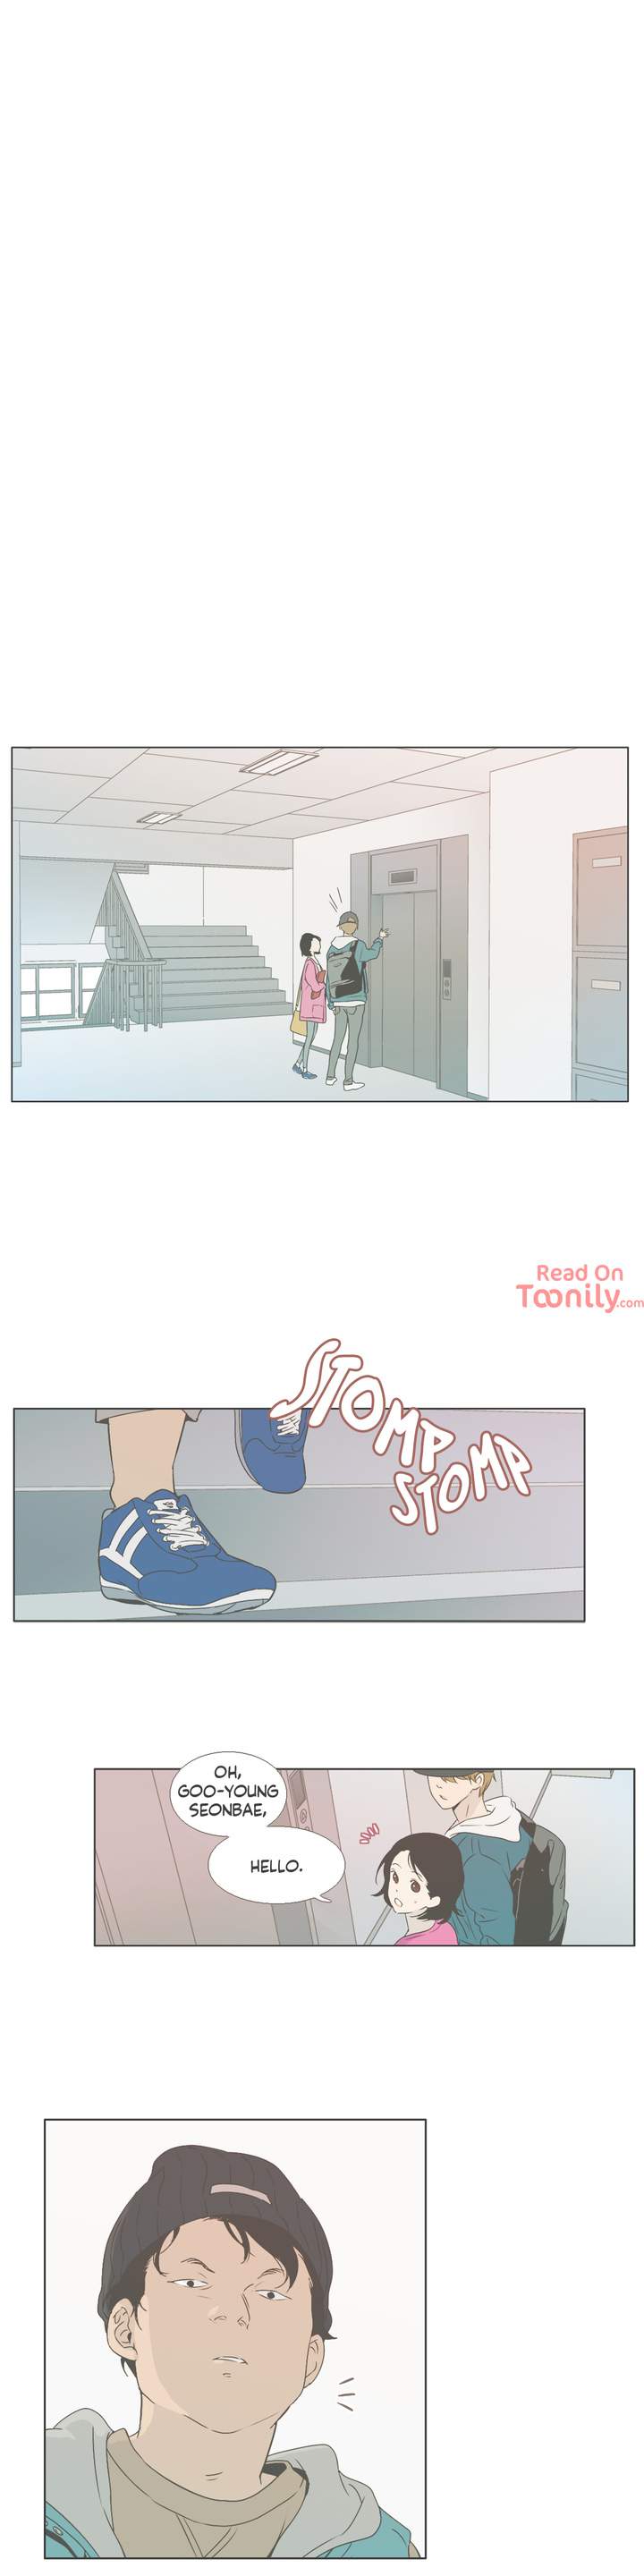 Something About Us - Chapter 4 Page 9